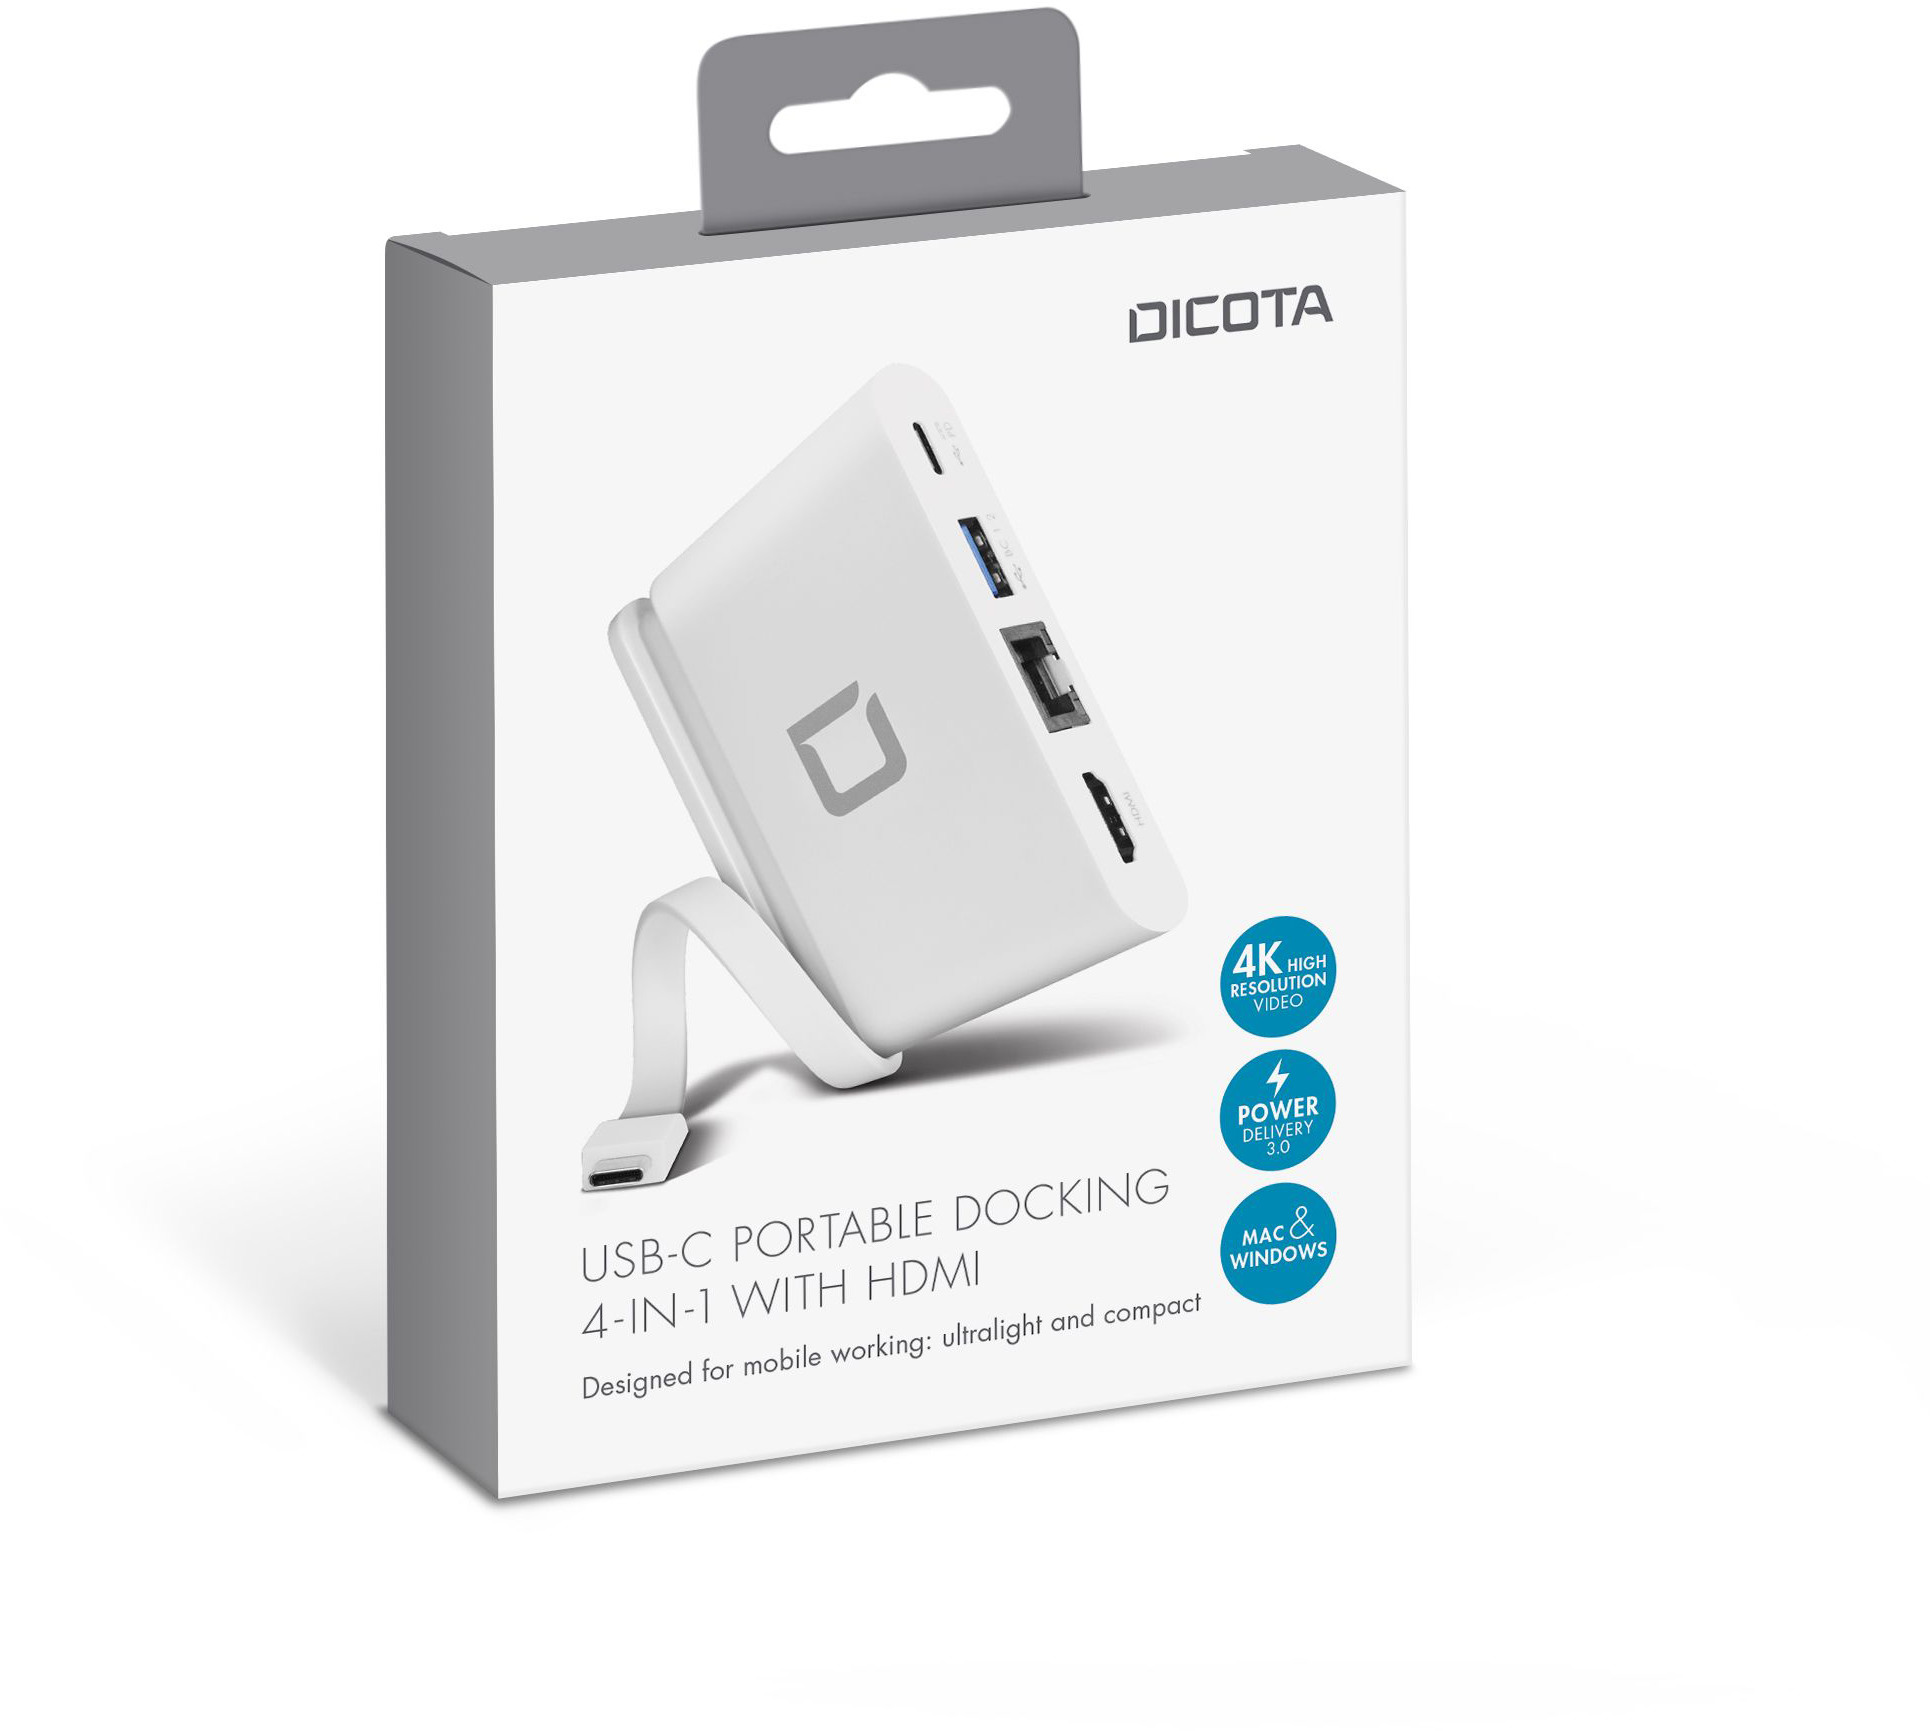 DICOTA USB-C Portable Docking D31730 4-in-1 with HDMI